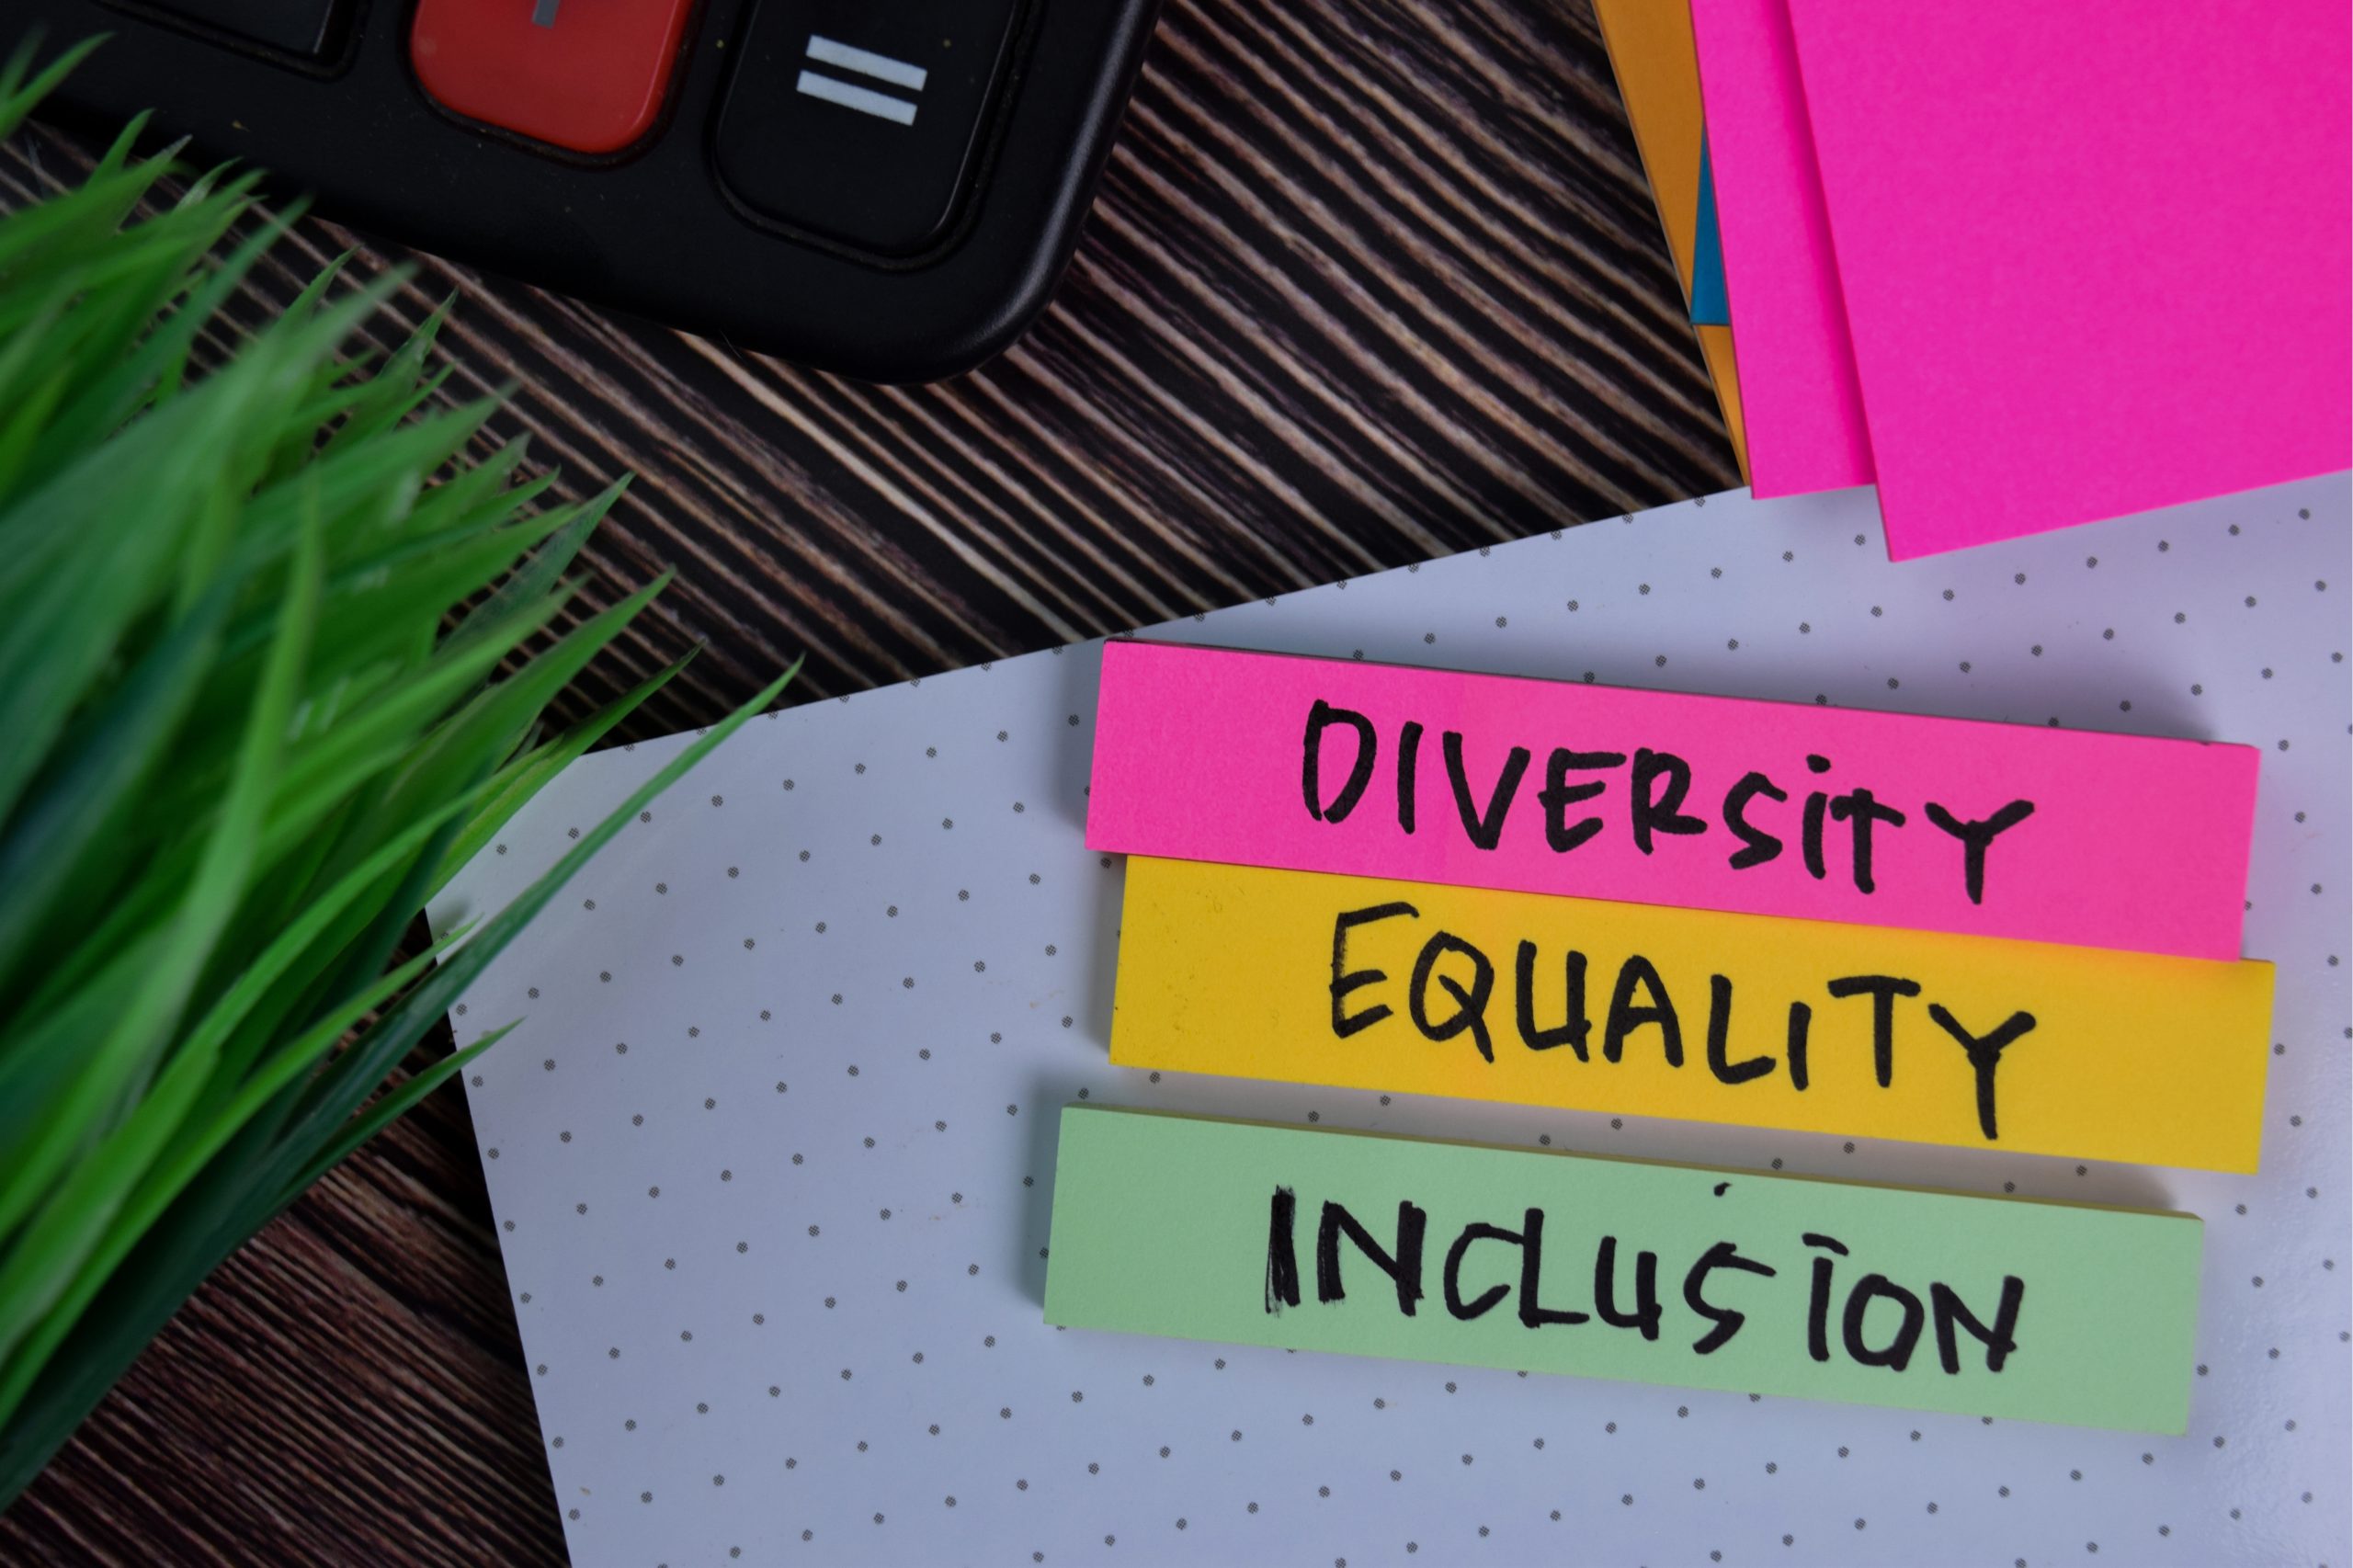 Key Diversity Inclusion Statistics About YOUR Workplace